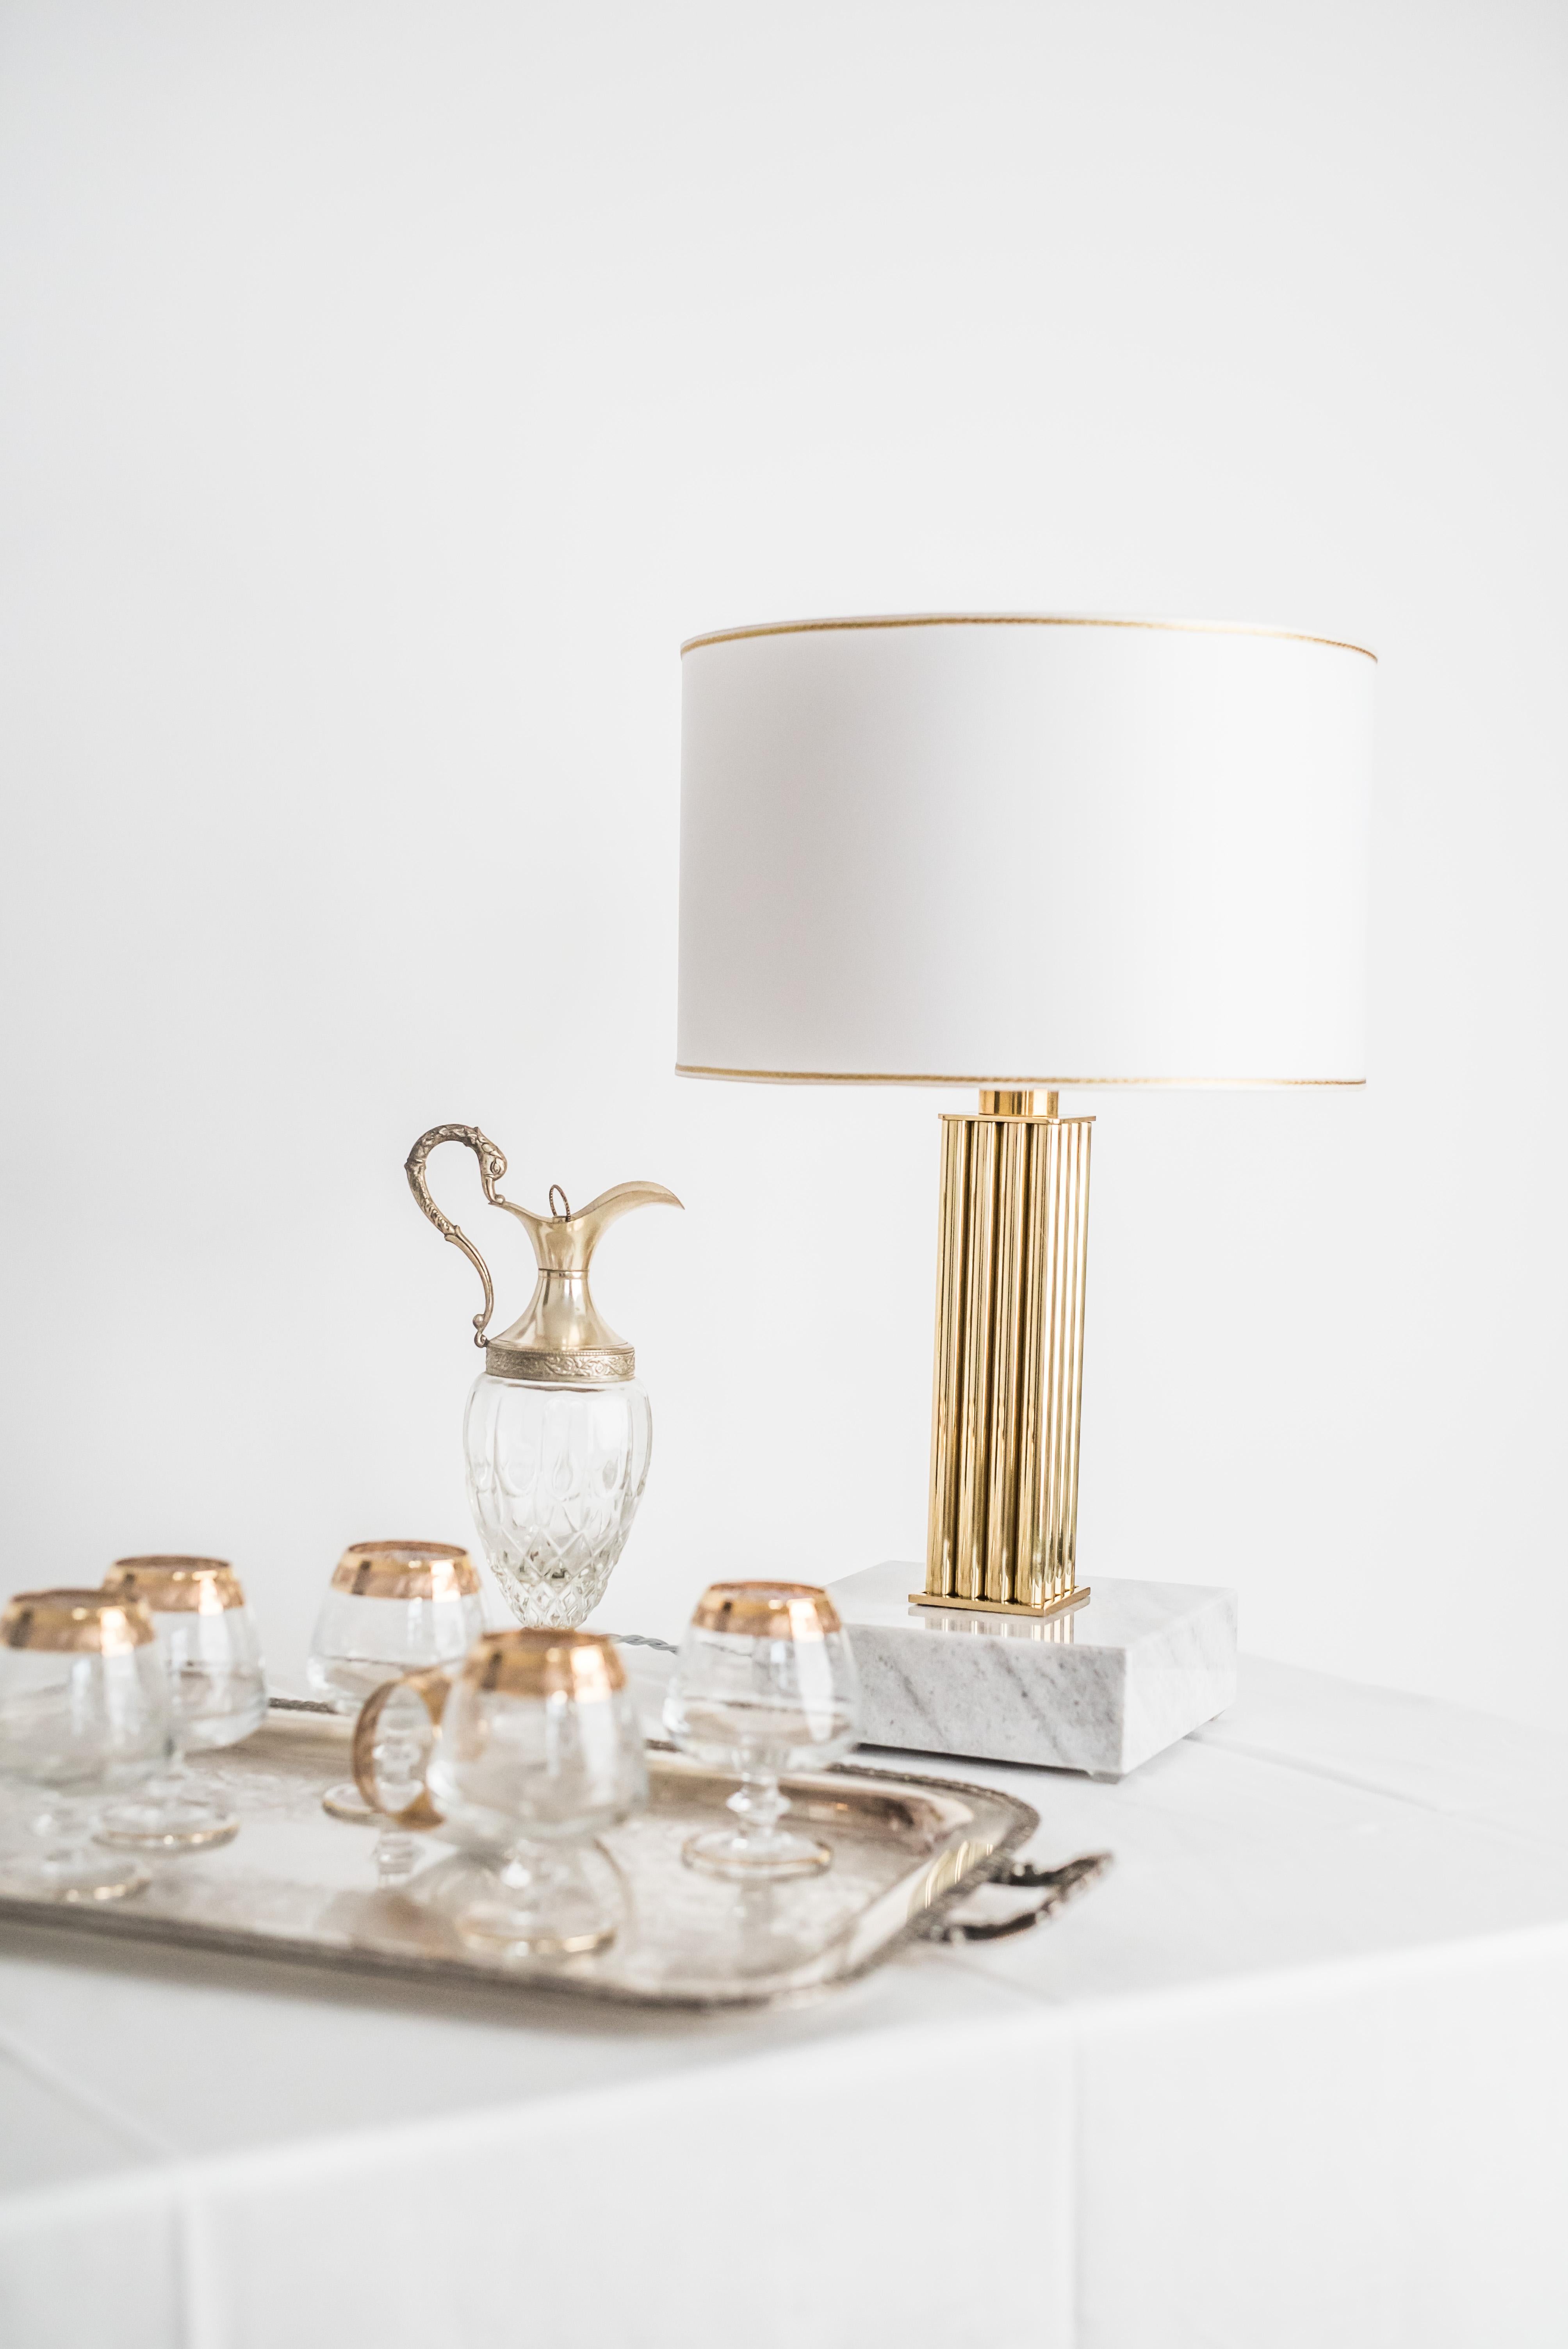 Brass Sculpted Table Lamp by Brajak Vitberg
ATHENS 1.1.
Mura marble (also available with carrara marble)
Polished brass
Dimensions: 53 x 35 x 35 cm
white or black cotton lampshade, cotton wiring


Bijelic and Brajak are two architects from